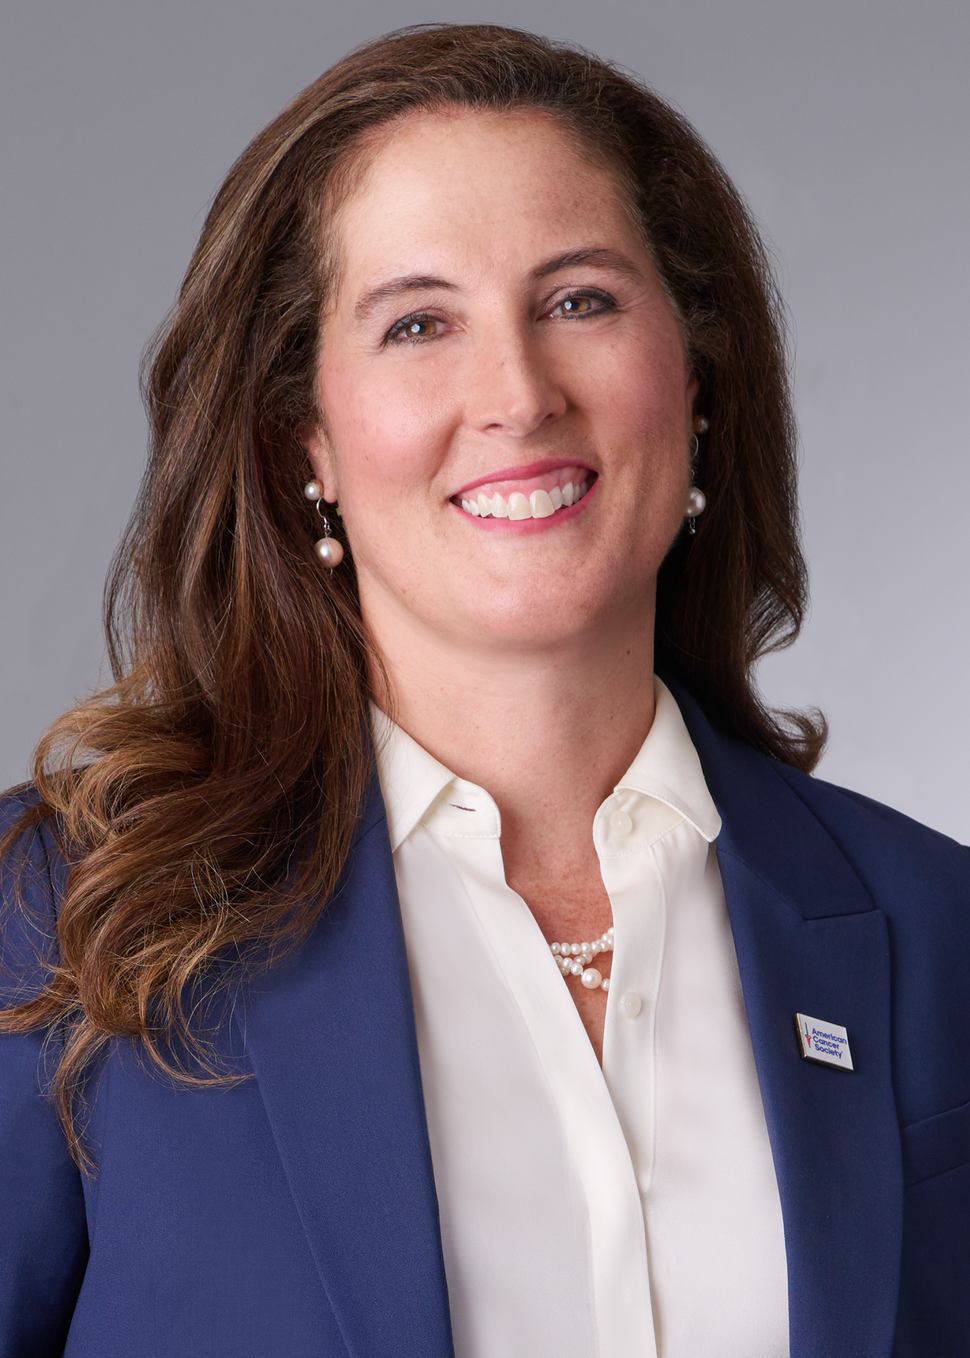 Woman with brown hair, white blouse, and blue blazer smiling